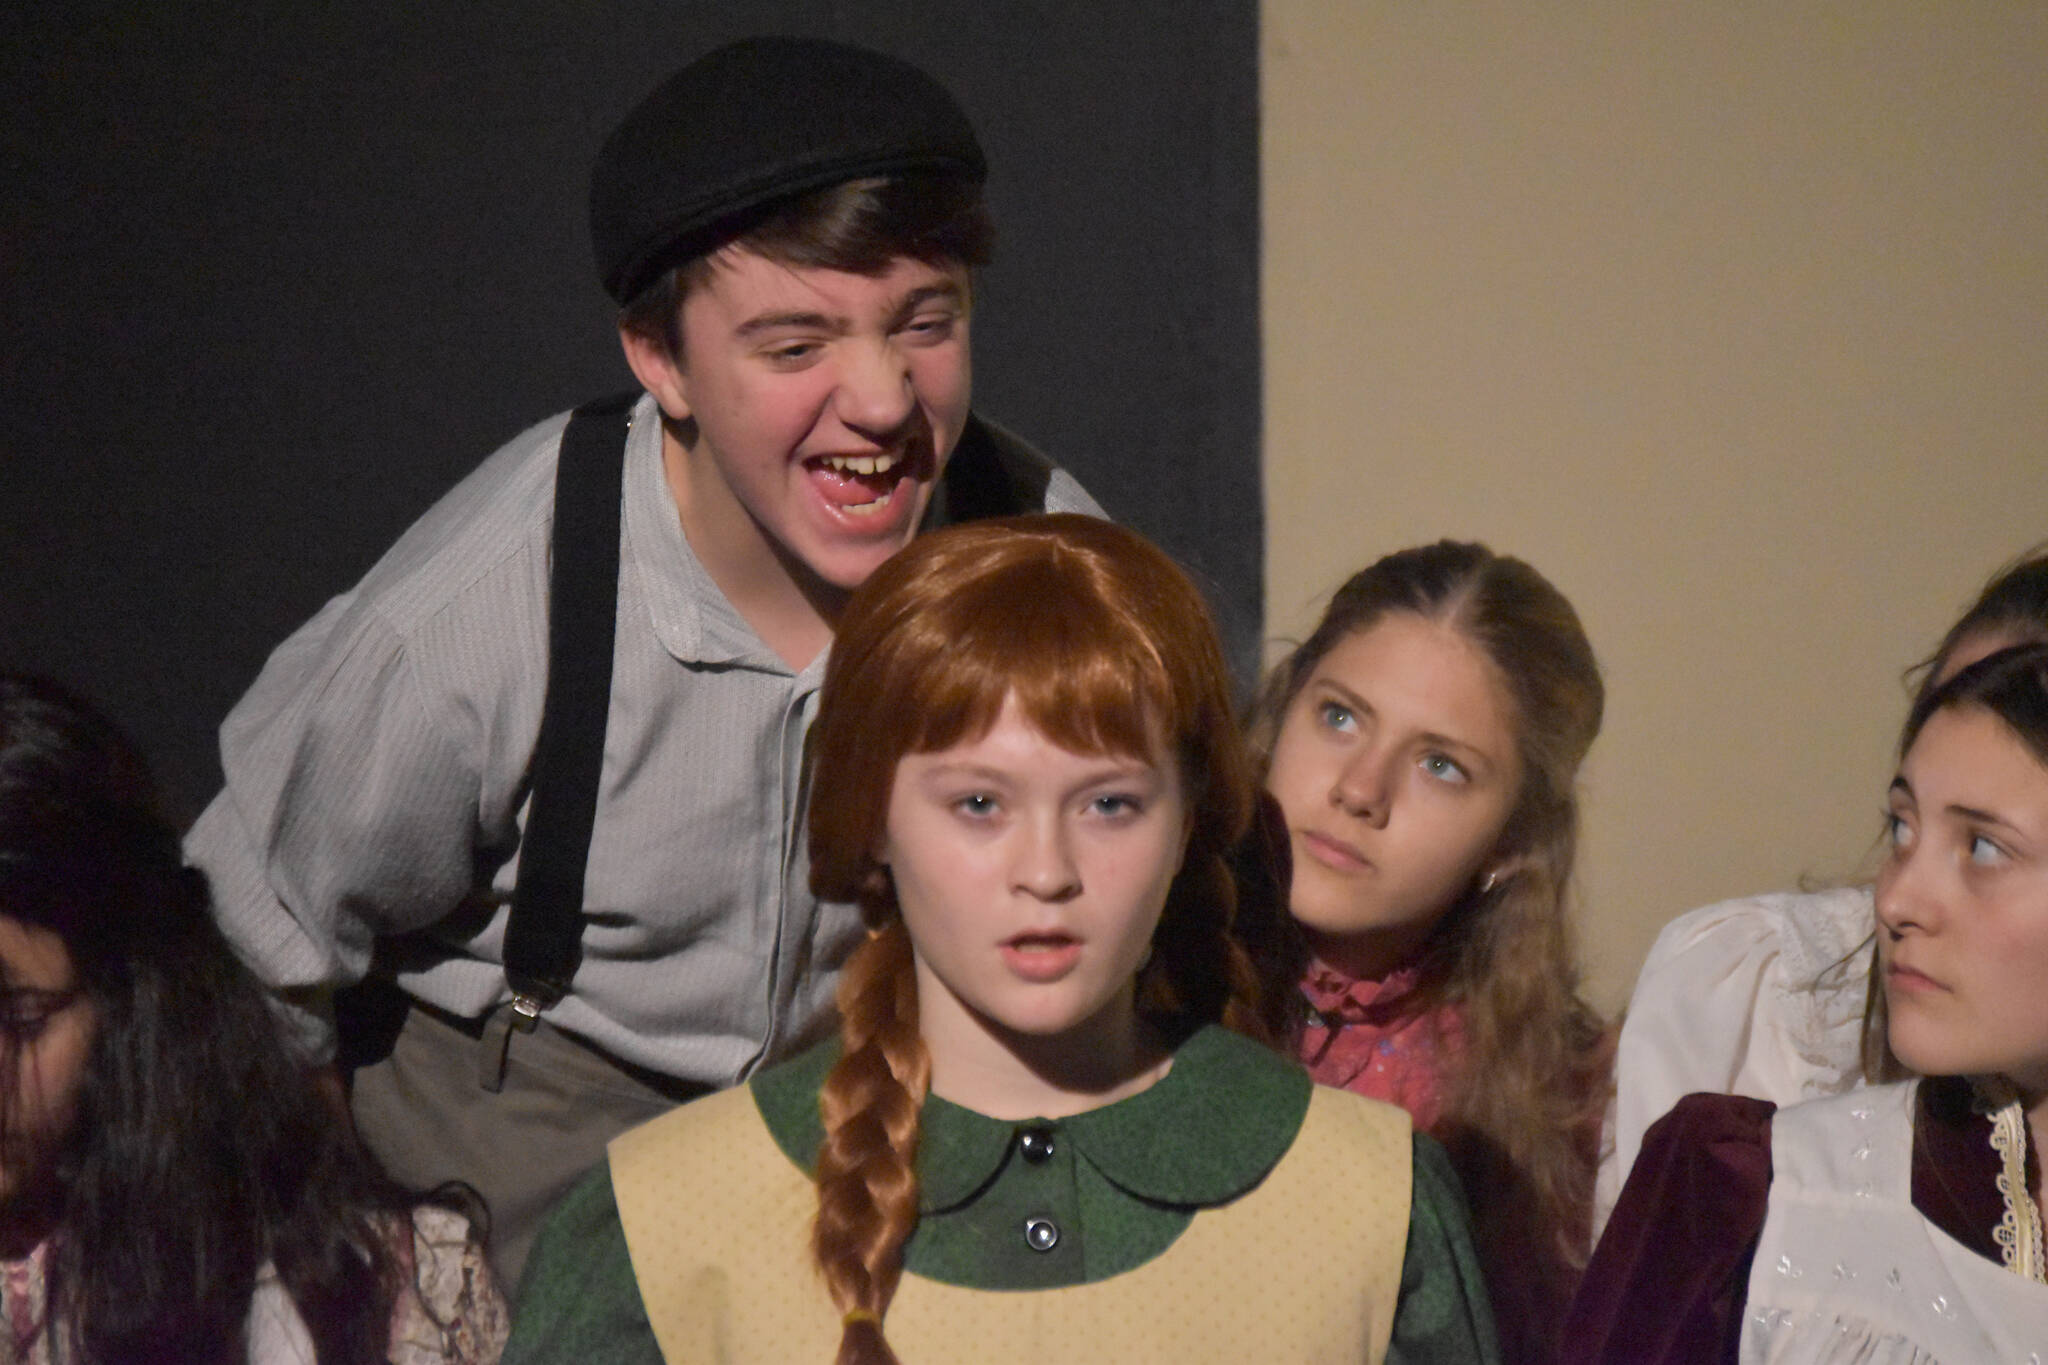 Jackson Hooper, as Gilbert, taunts Truly Hondel, as Anne, in a rehearsal of “Anne of Green Gables” at the Kenai Performers Black Box Theatre in Soldotna, Alaska, on Tuesday, Nov. 1, 2022. (Jake Dye/Peninsula Clarion)